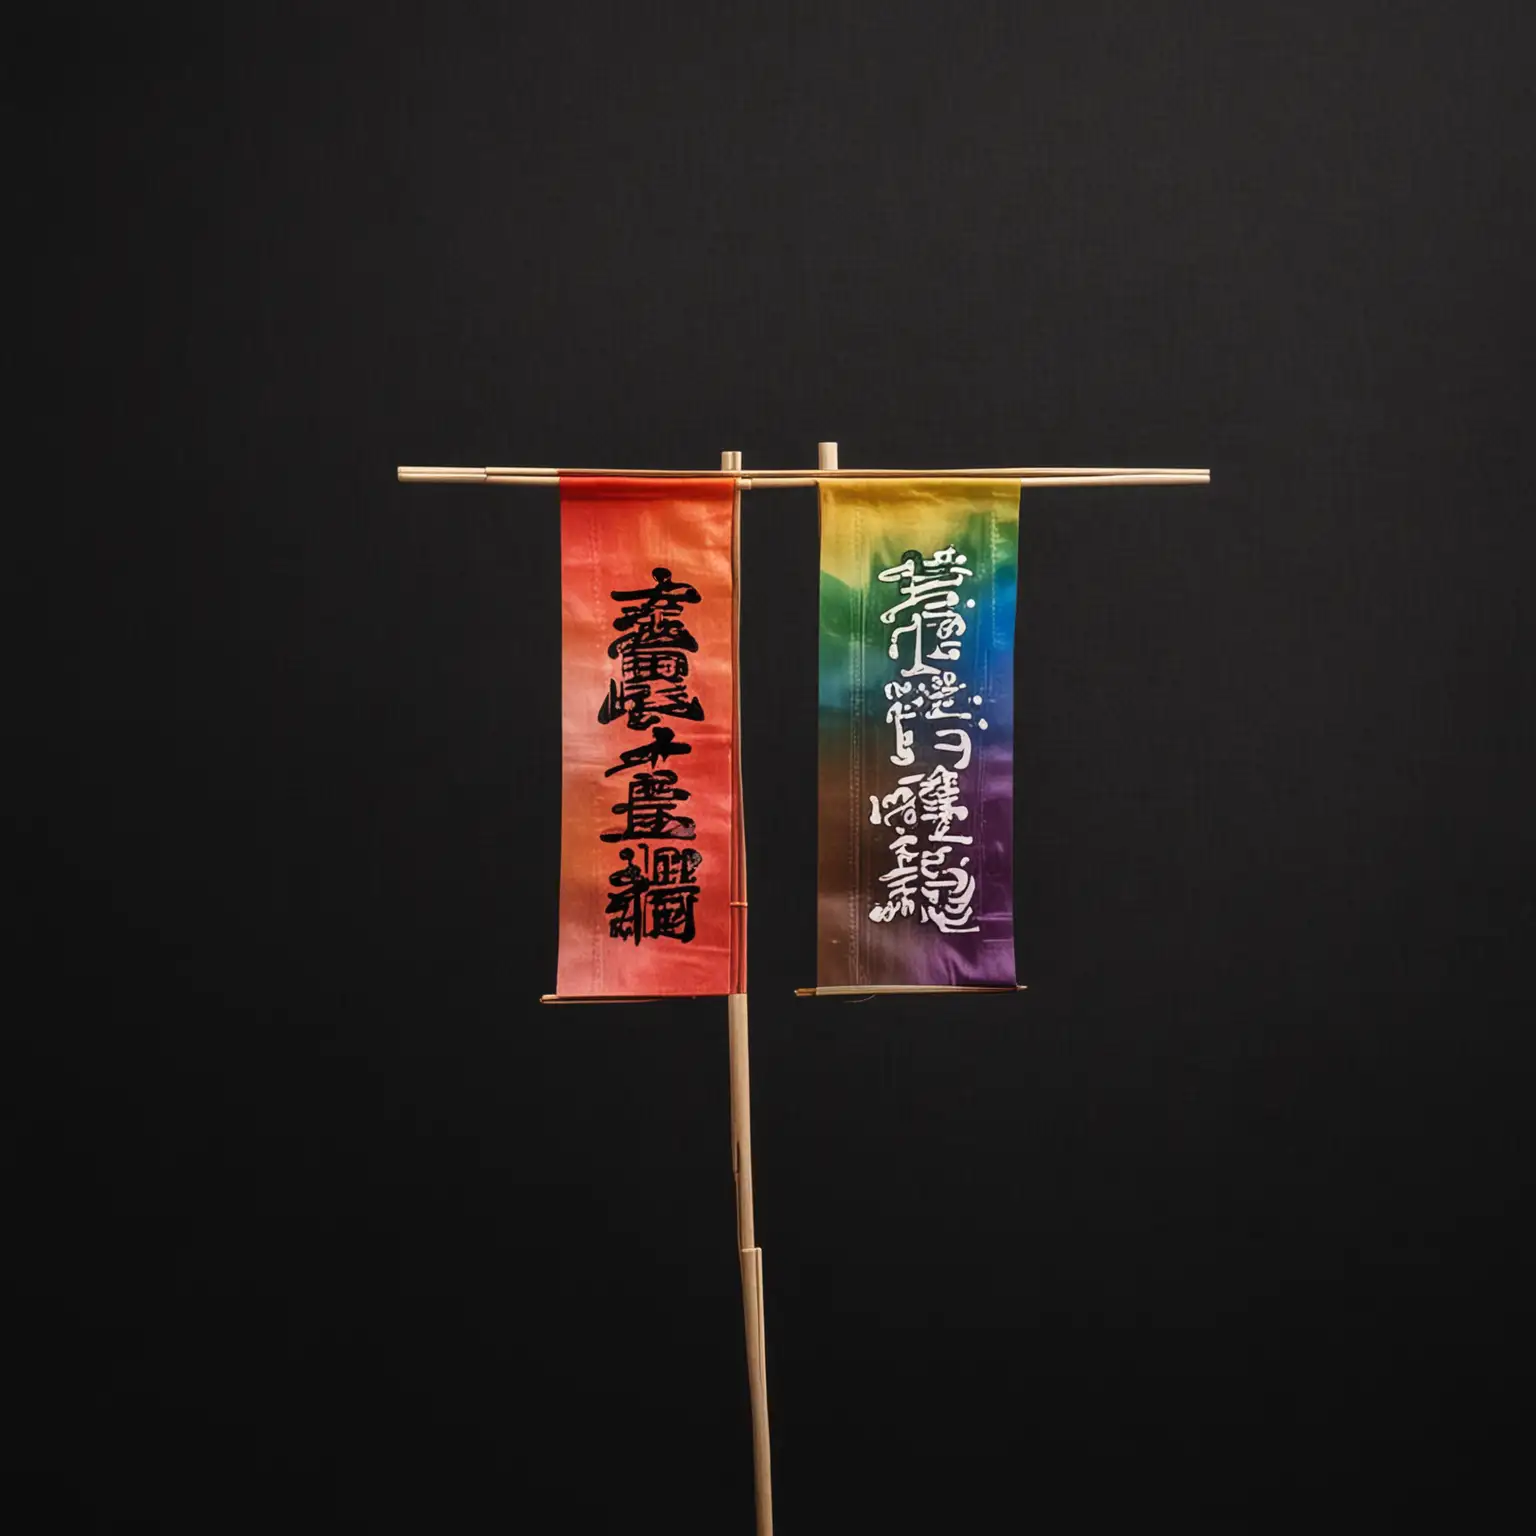 Rainbow Japanese banner on a stick, Chinese writing, black background